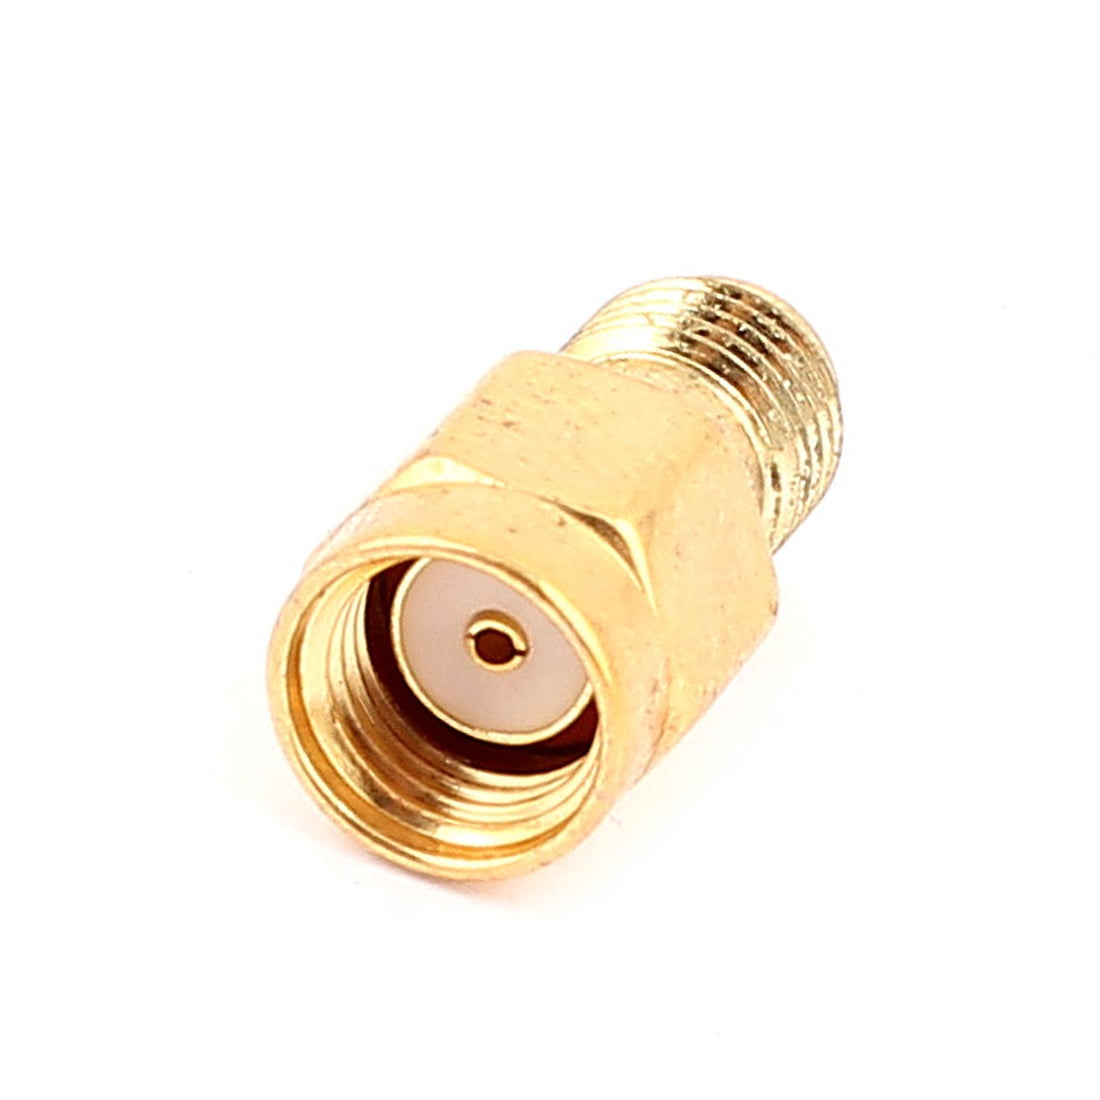 USA-CA RG188  SMA FEMALE to SMA MALE Coaxial RF Pigtail Cable 